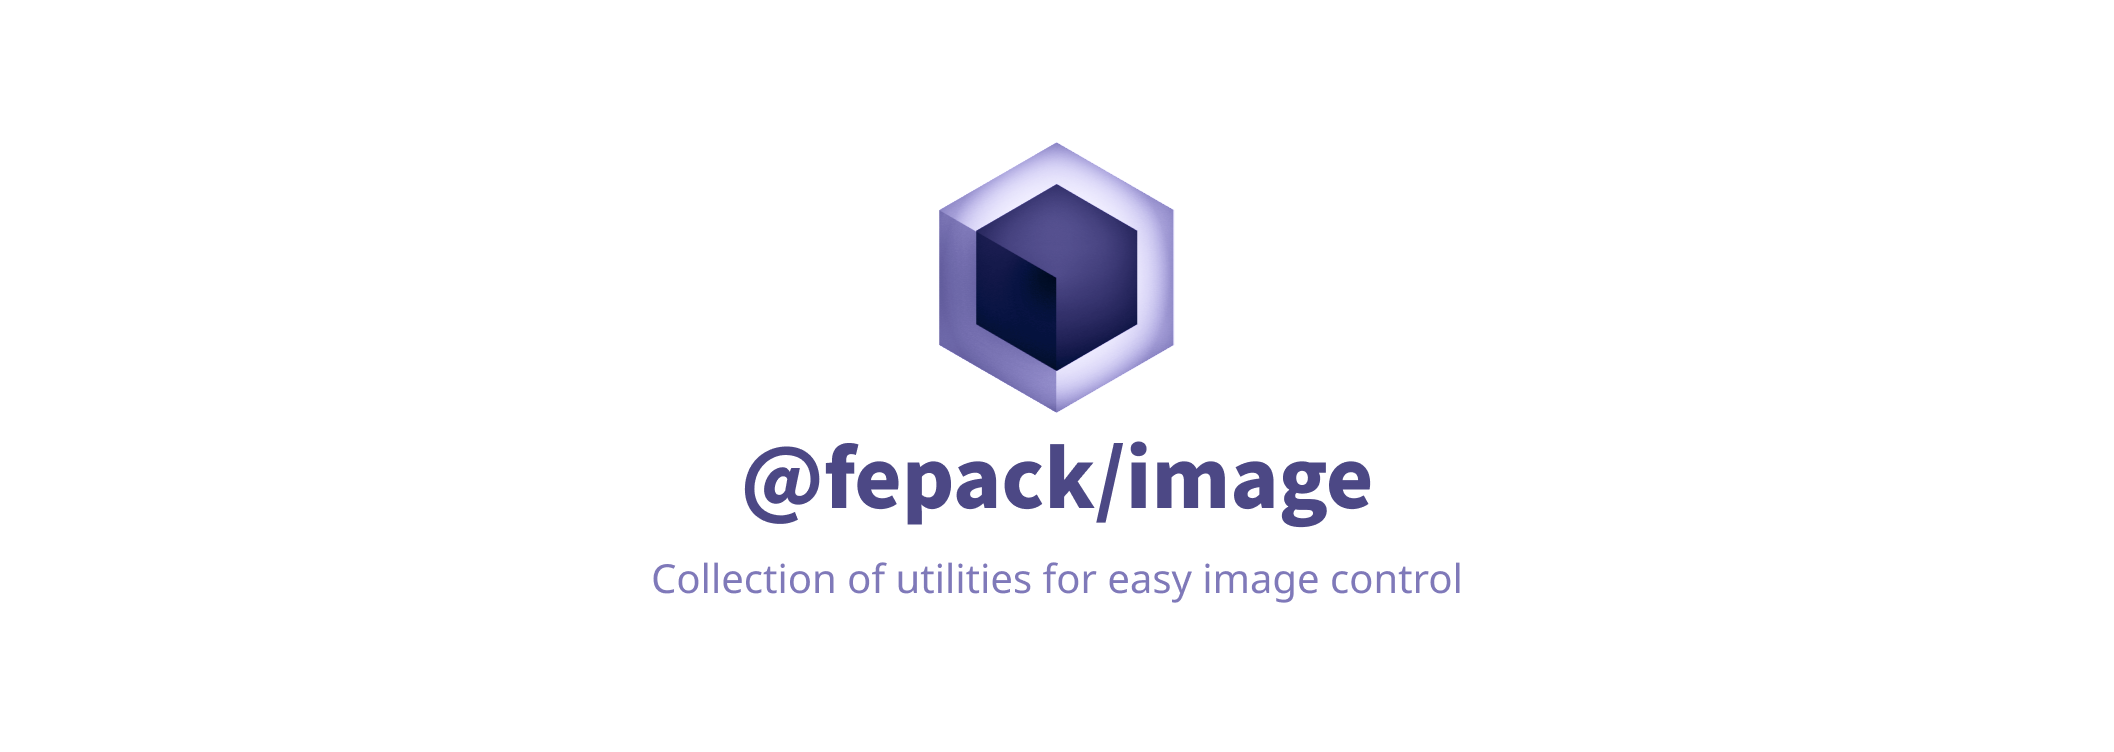 @fepack/image - Collection of utilities for easy image control